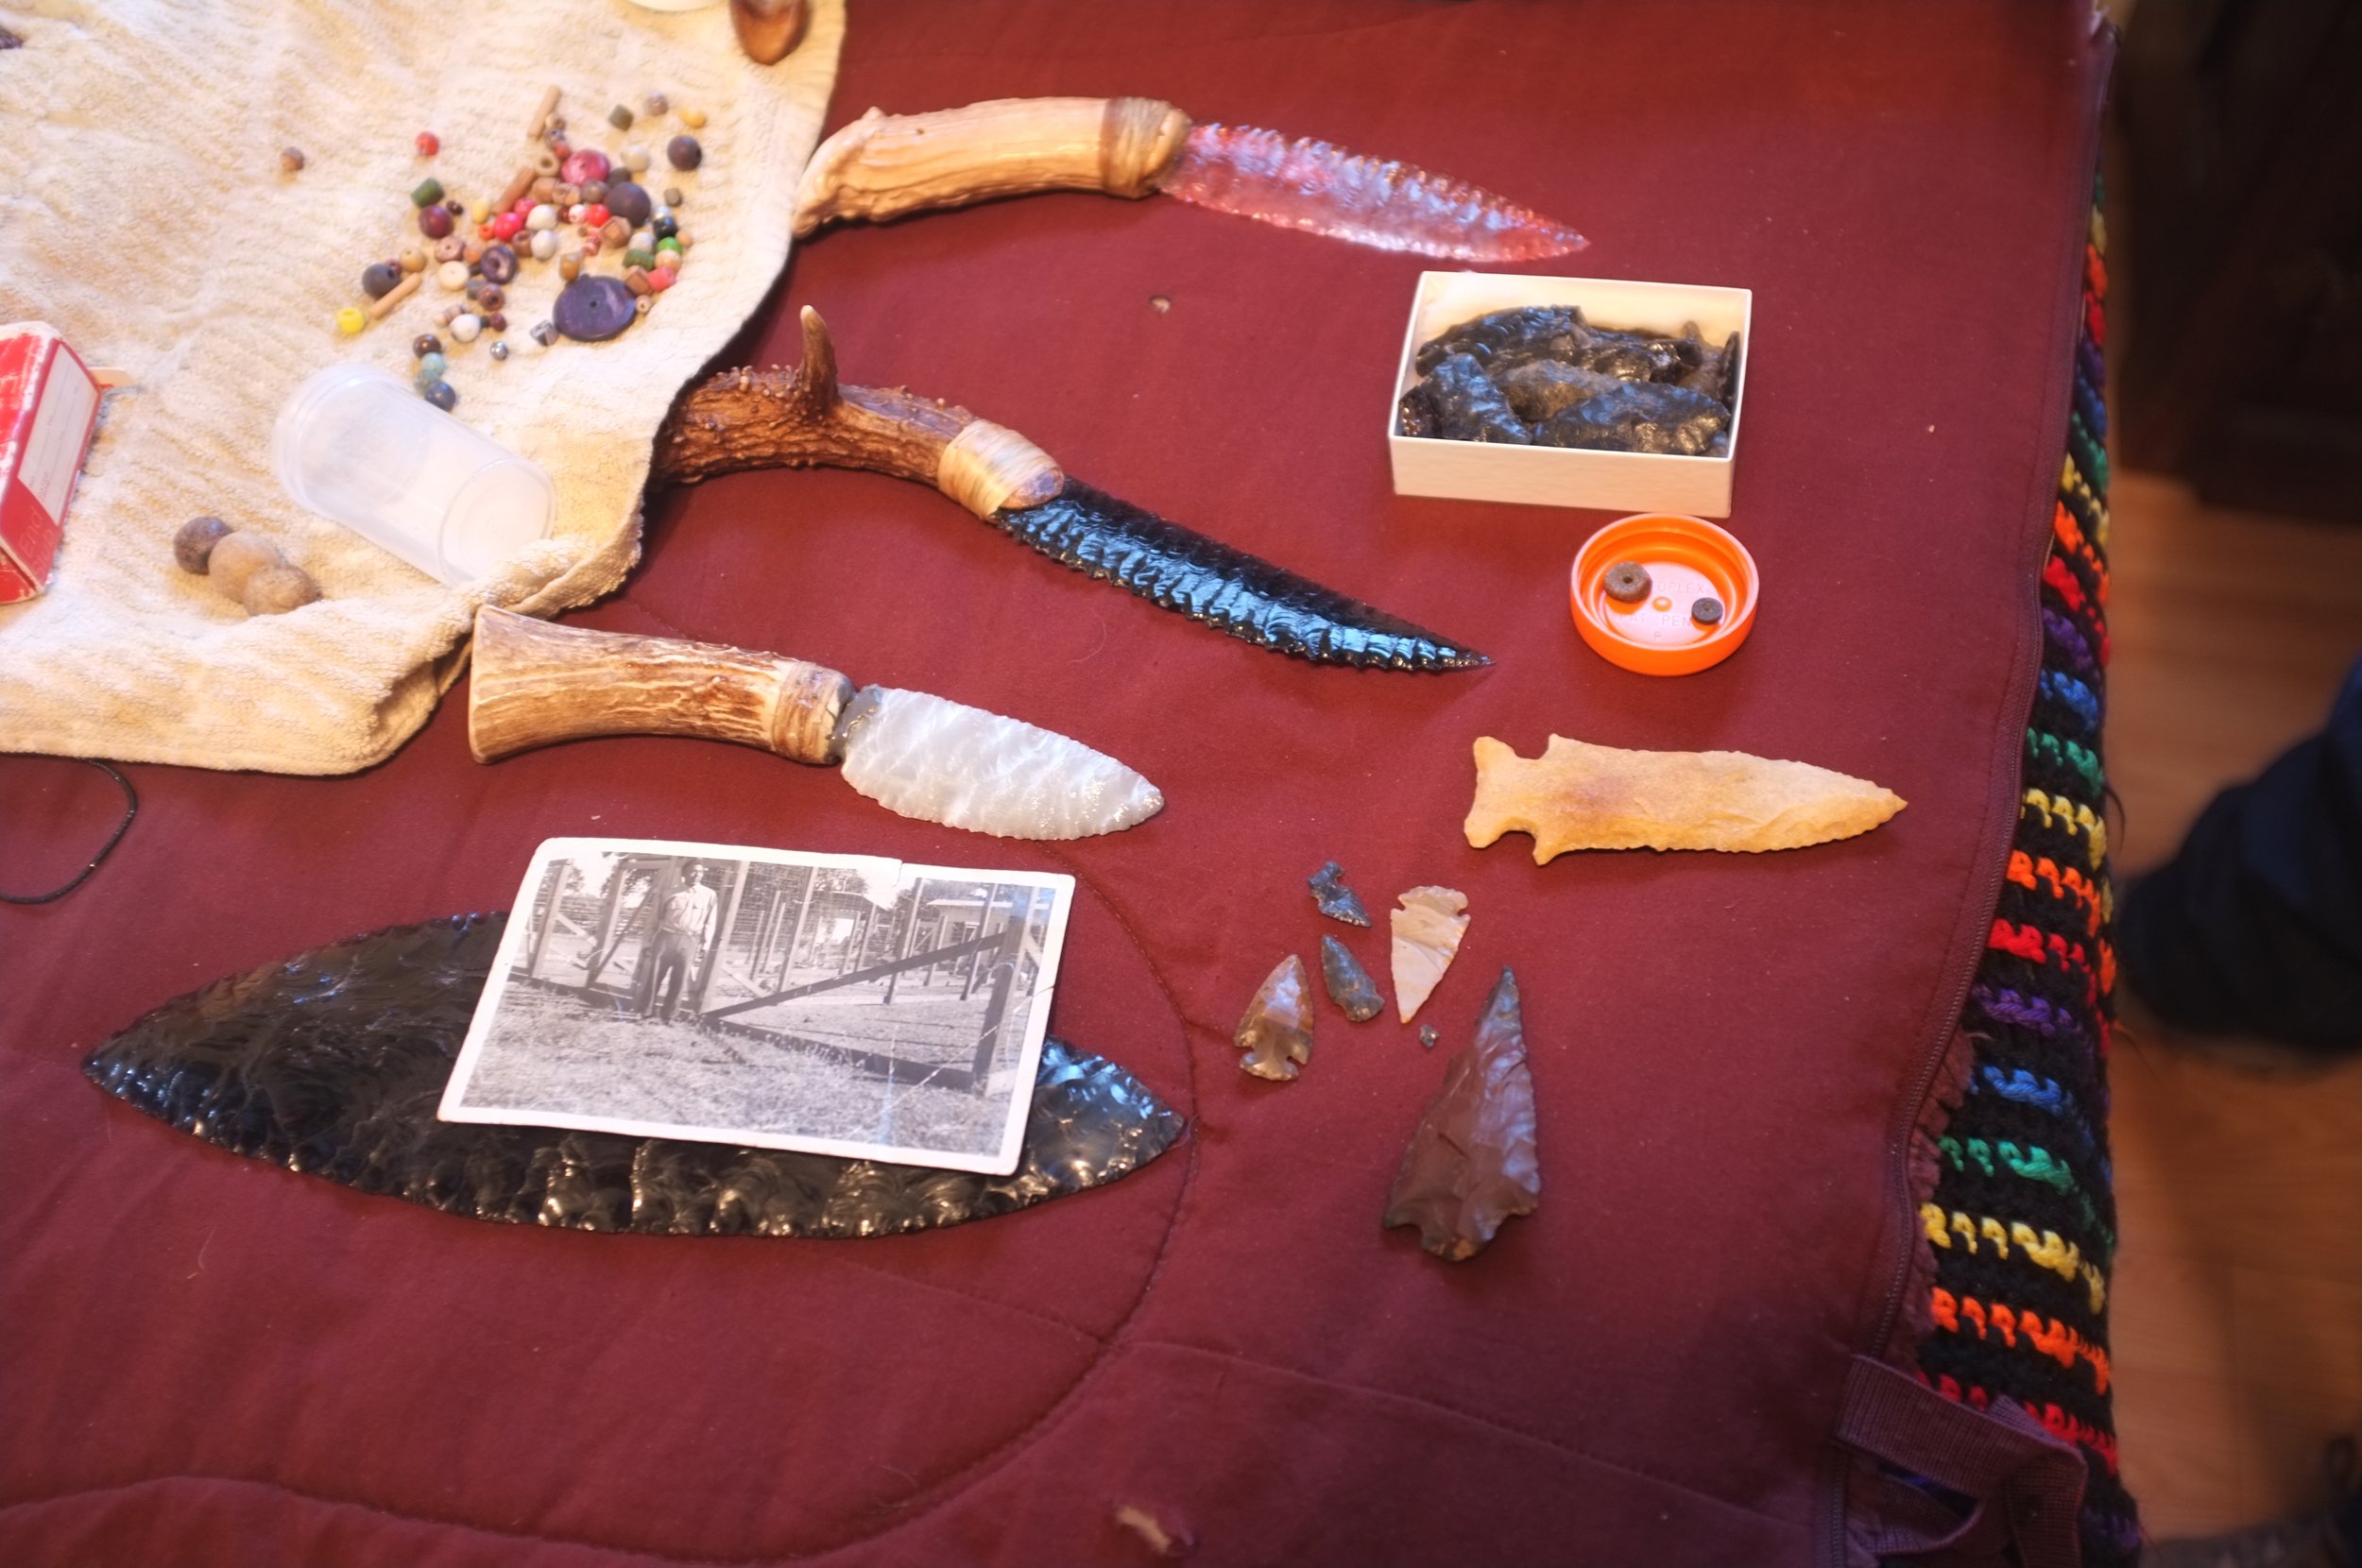  Hayfork, CA — Bob Burns displays arrowheads and knives from his collection of Indigenous artifacts. March 16, 2019. Judy Silber/The Spiritual Edge 